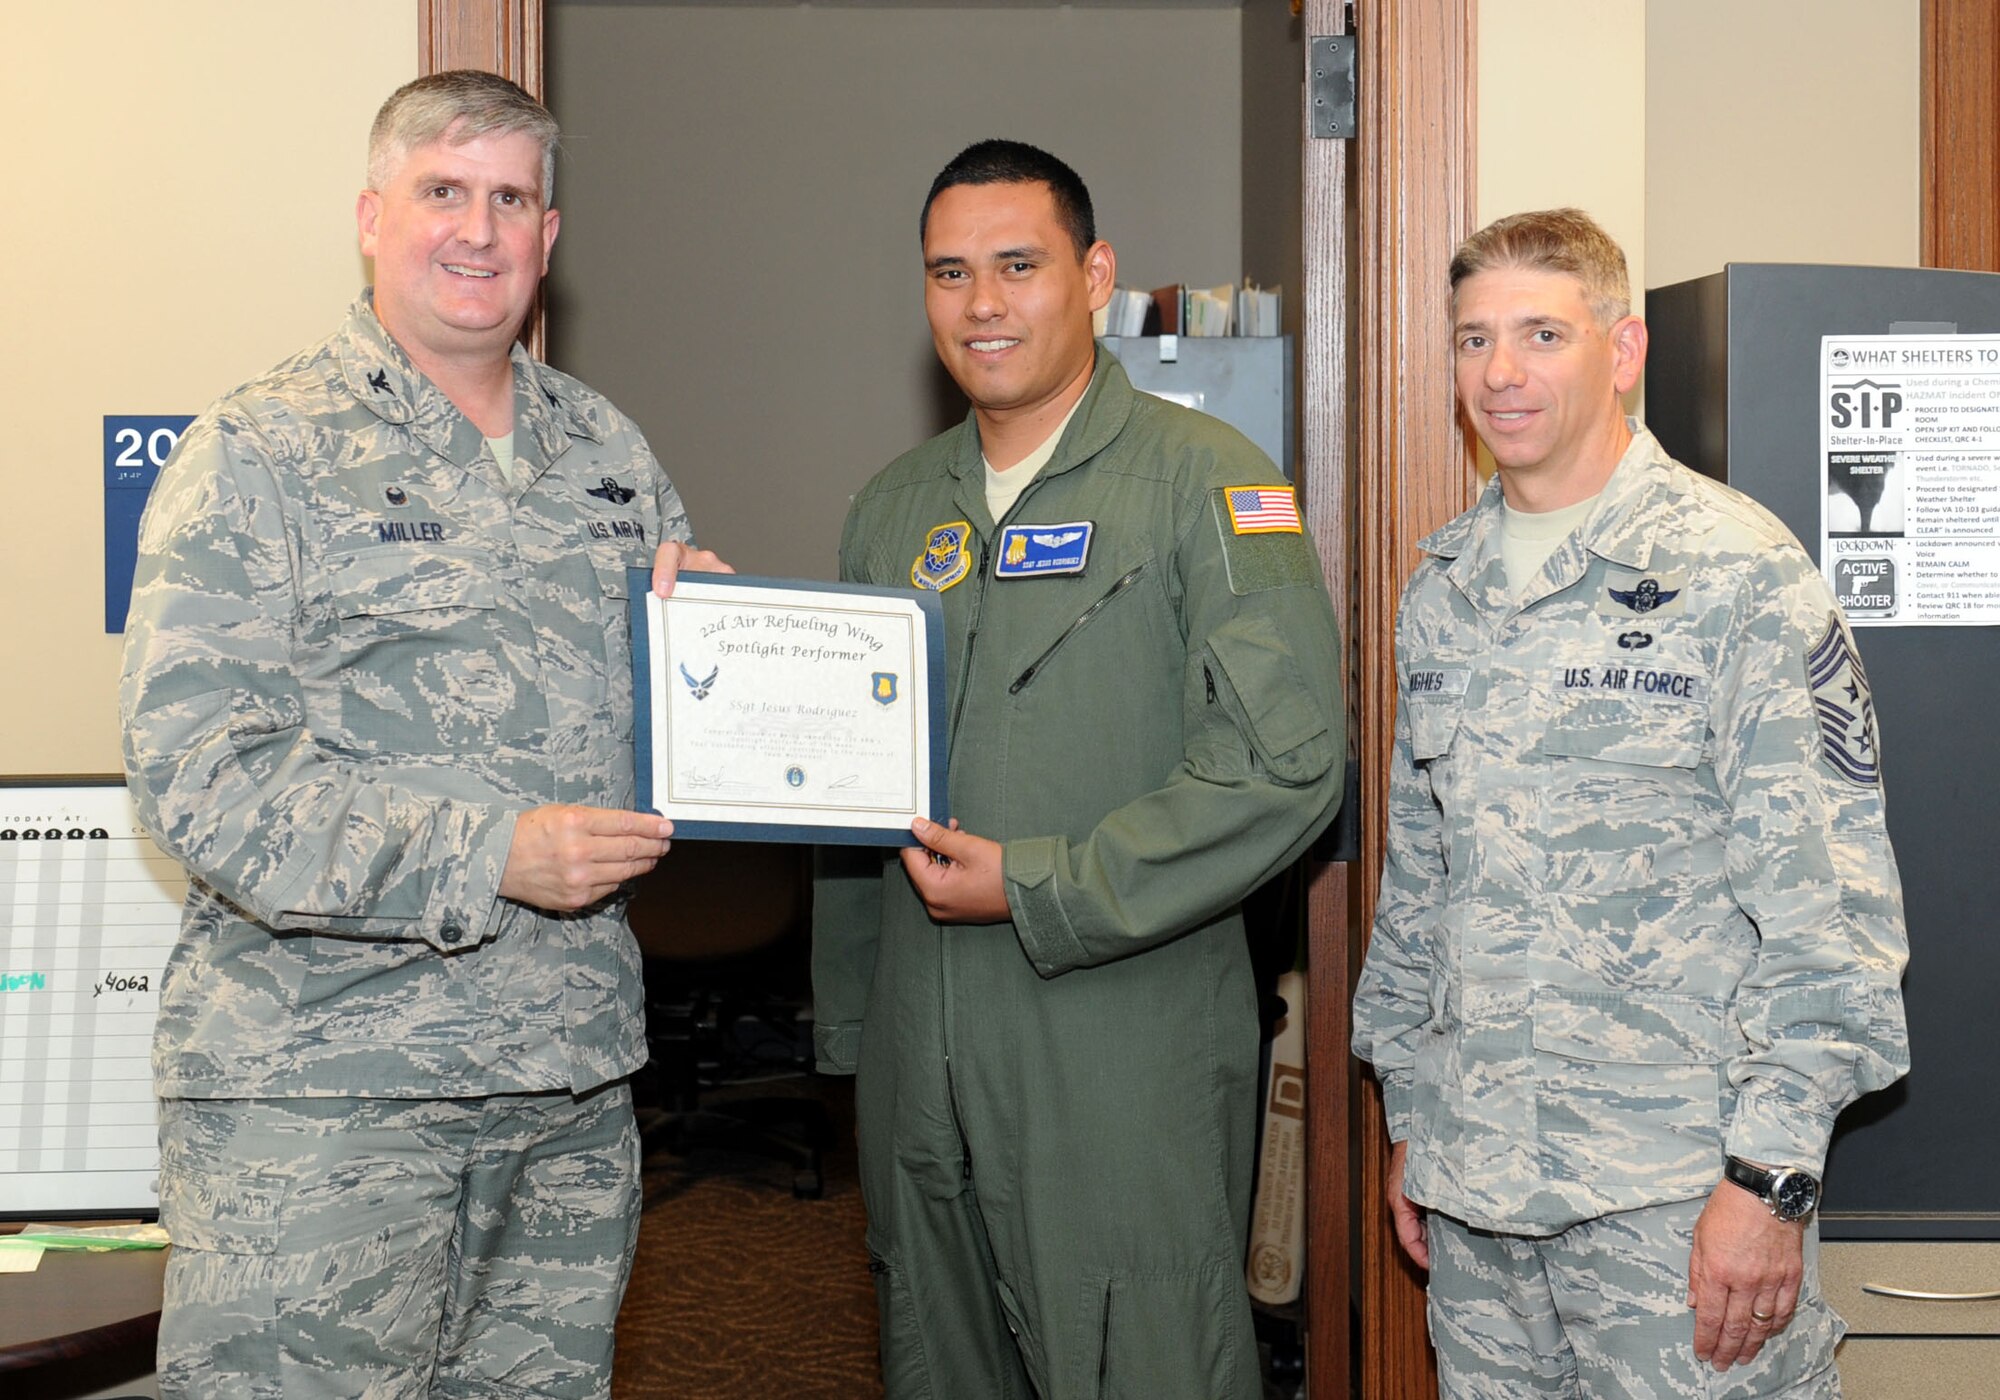 Staff Sgt. Jesus Rodriguez, 22nd Operations Group unit deployment manager and boom operator, poses with Col. Albert Miller, 22nd Air Refueling Wing commander, and Chief Master Sgt. Shawn Hughes, 22nd ARW command chief, July 19, 2016, at McConnell Air Force Base, Kan. Rodriguez received the spotlight performer for the week of May 23-27. (U.S. Air Force photo/Senior Airman David Bernal Del Agua)